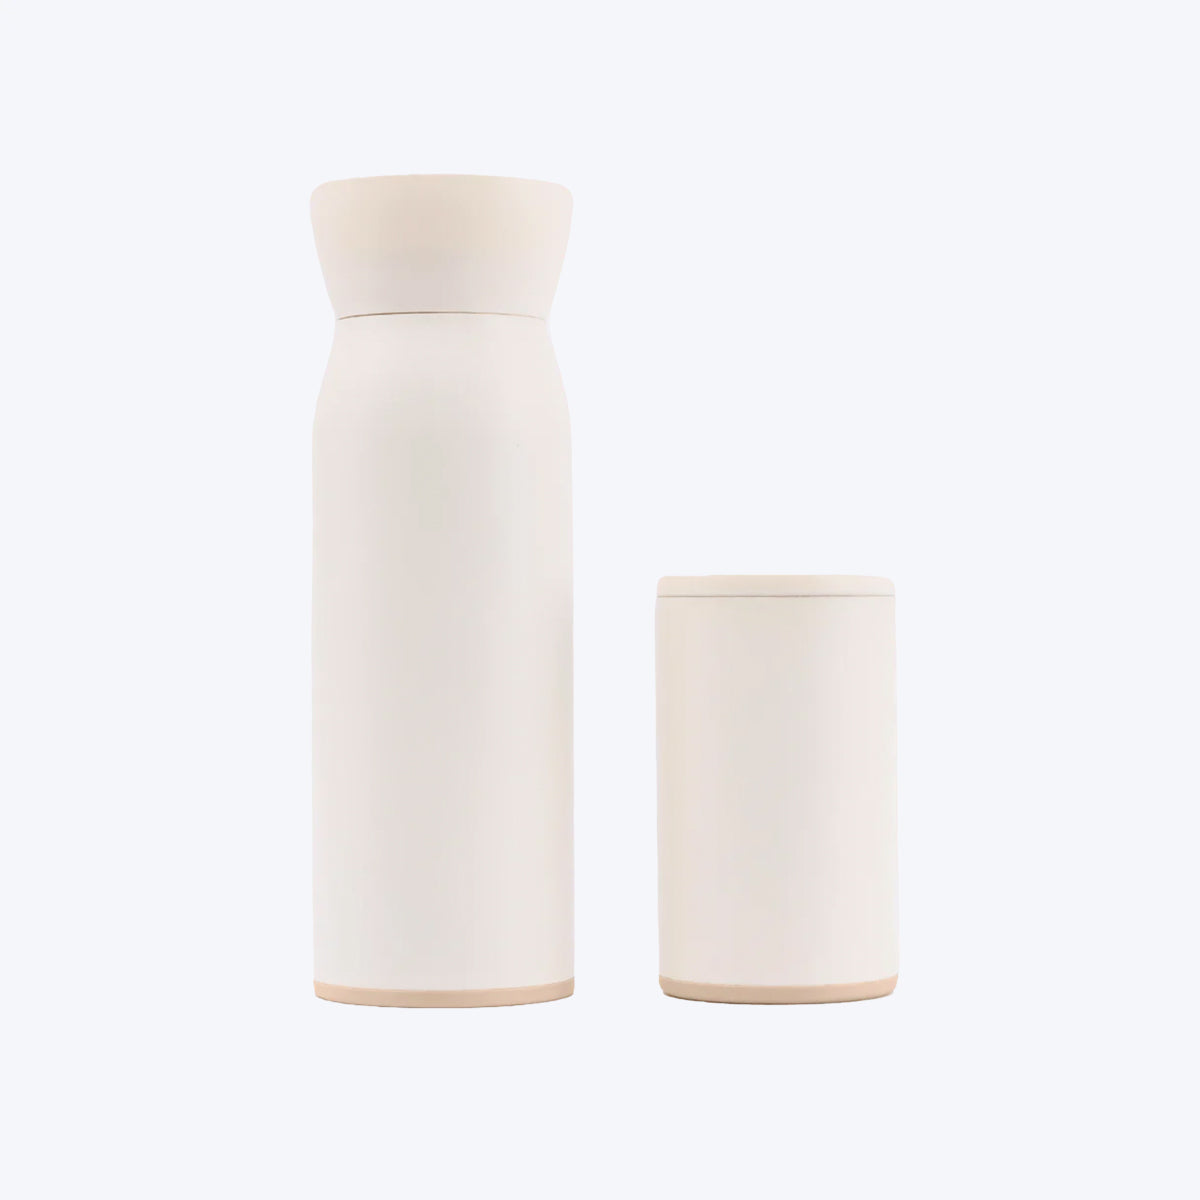 Hitch Bottle and Cup set in Natural White